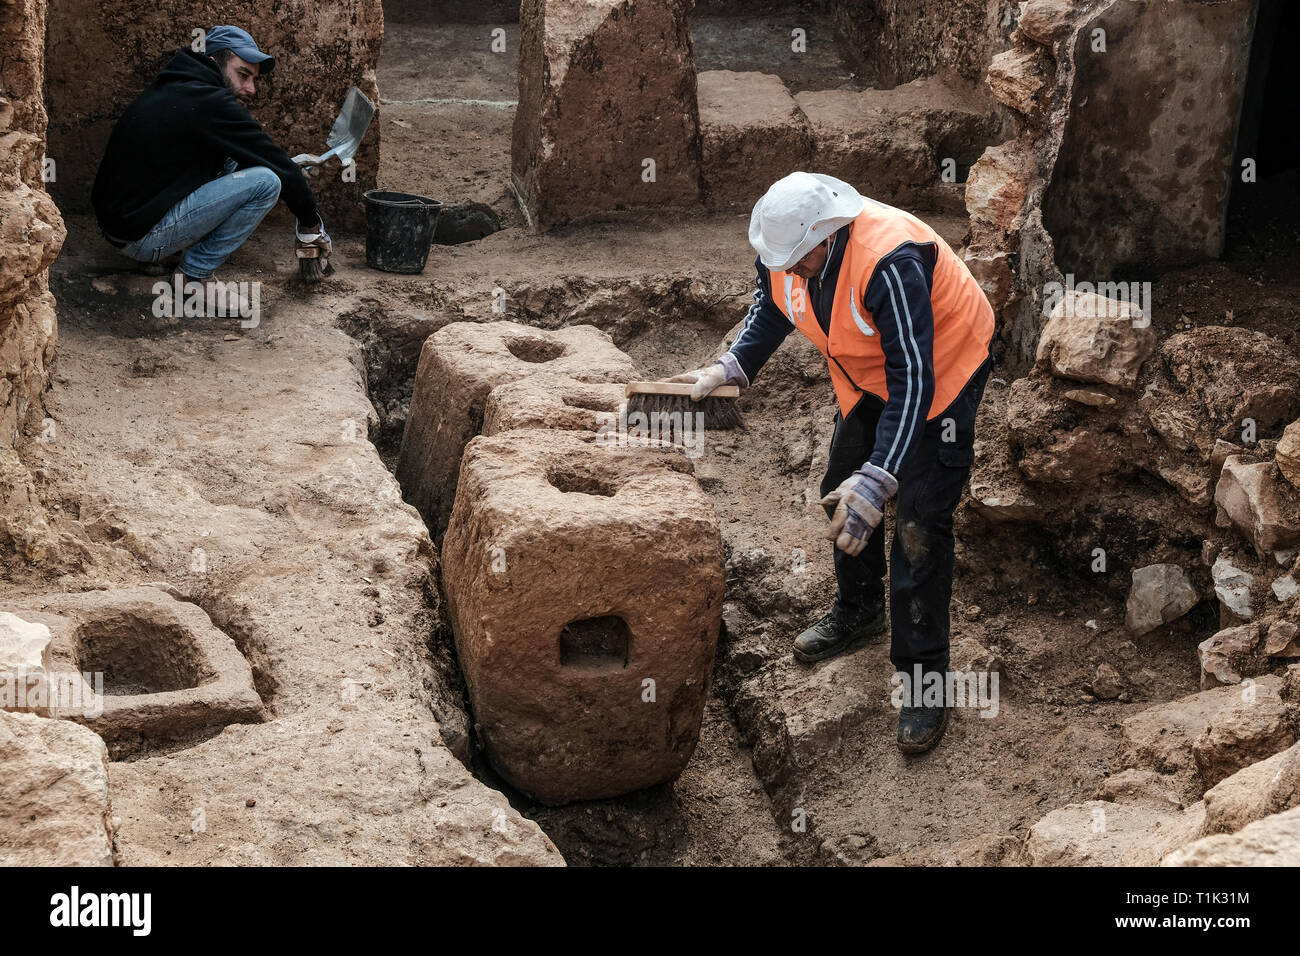 Jerusalem, Israel. 27th March, 2019. A 2000 year old Hasmonean period, 2nd temple era, Jewish village of agricultural nature, has been uncovered in excavations conducted in the Sharafat neighborhood of Jerusalem. Excavations have yielded remains of a large wine press containing fragments of many storage jars, a large columbarium cave (rock cut dovecote), an olive press, a large ritual bath (mikveh), a water cistern, rock quarries and installations. . Credit: Nir Alon/Alamy Live News Stock Photo